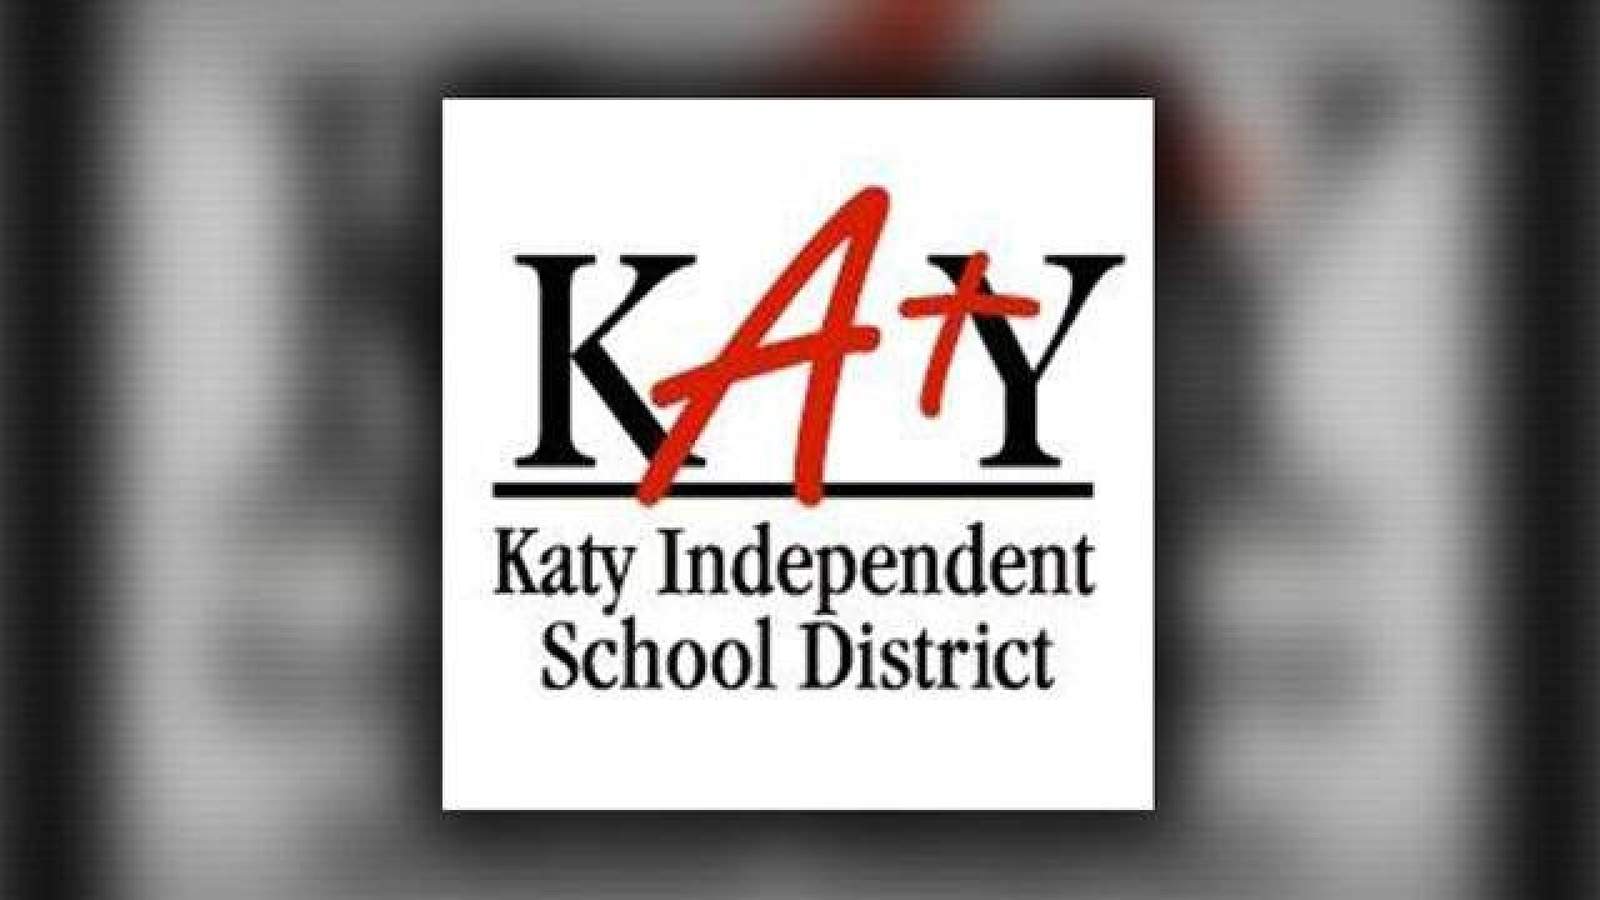 Katy Independent School District: What you need to know about the district’s 2020-2021 school plans.